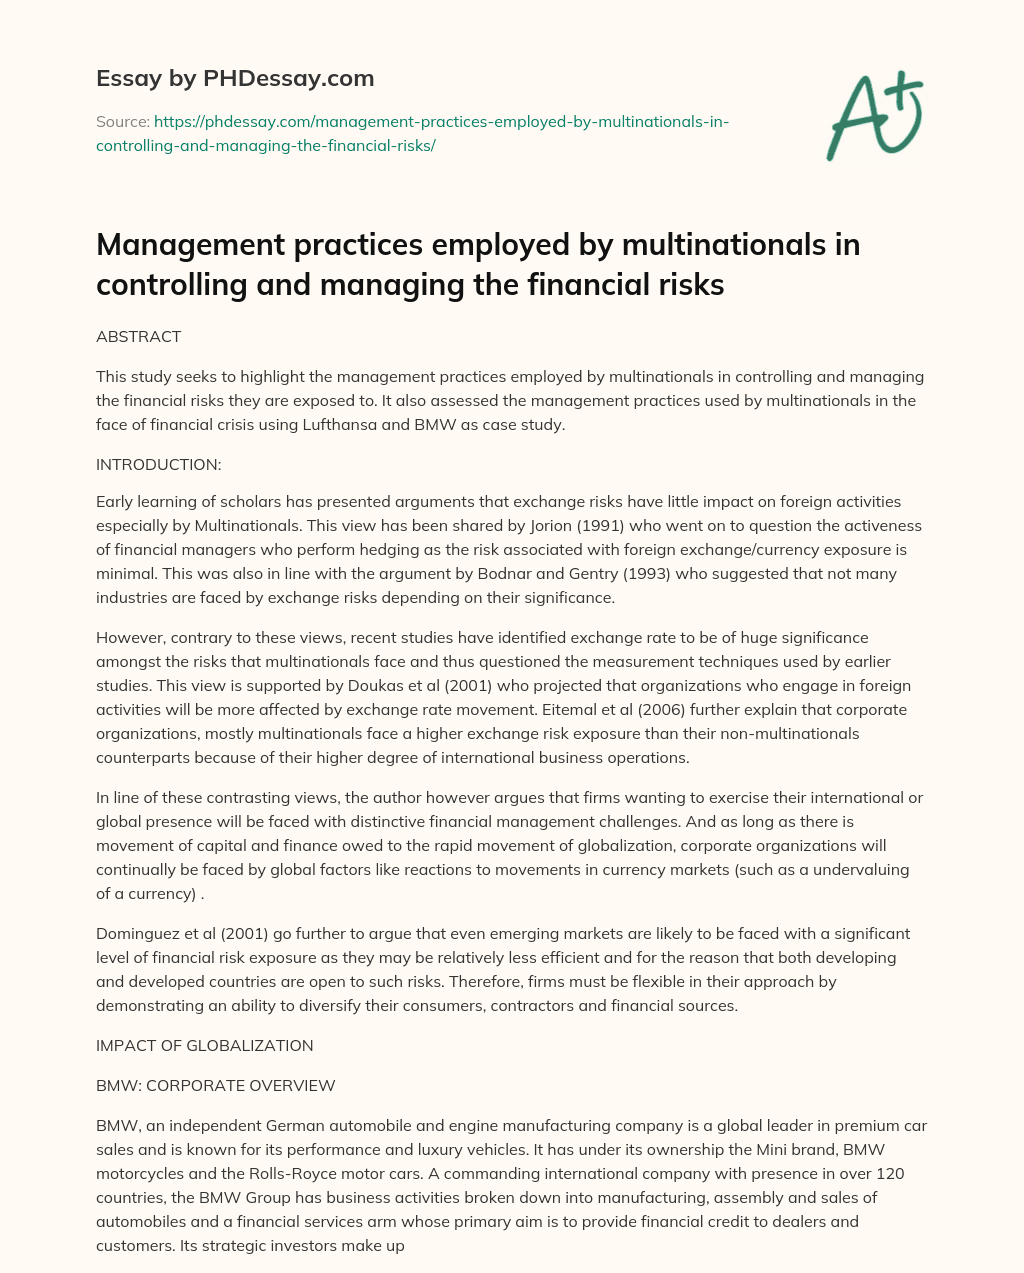 Management practices employed by multinationals in controlling and managing the financial risks essay